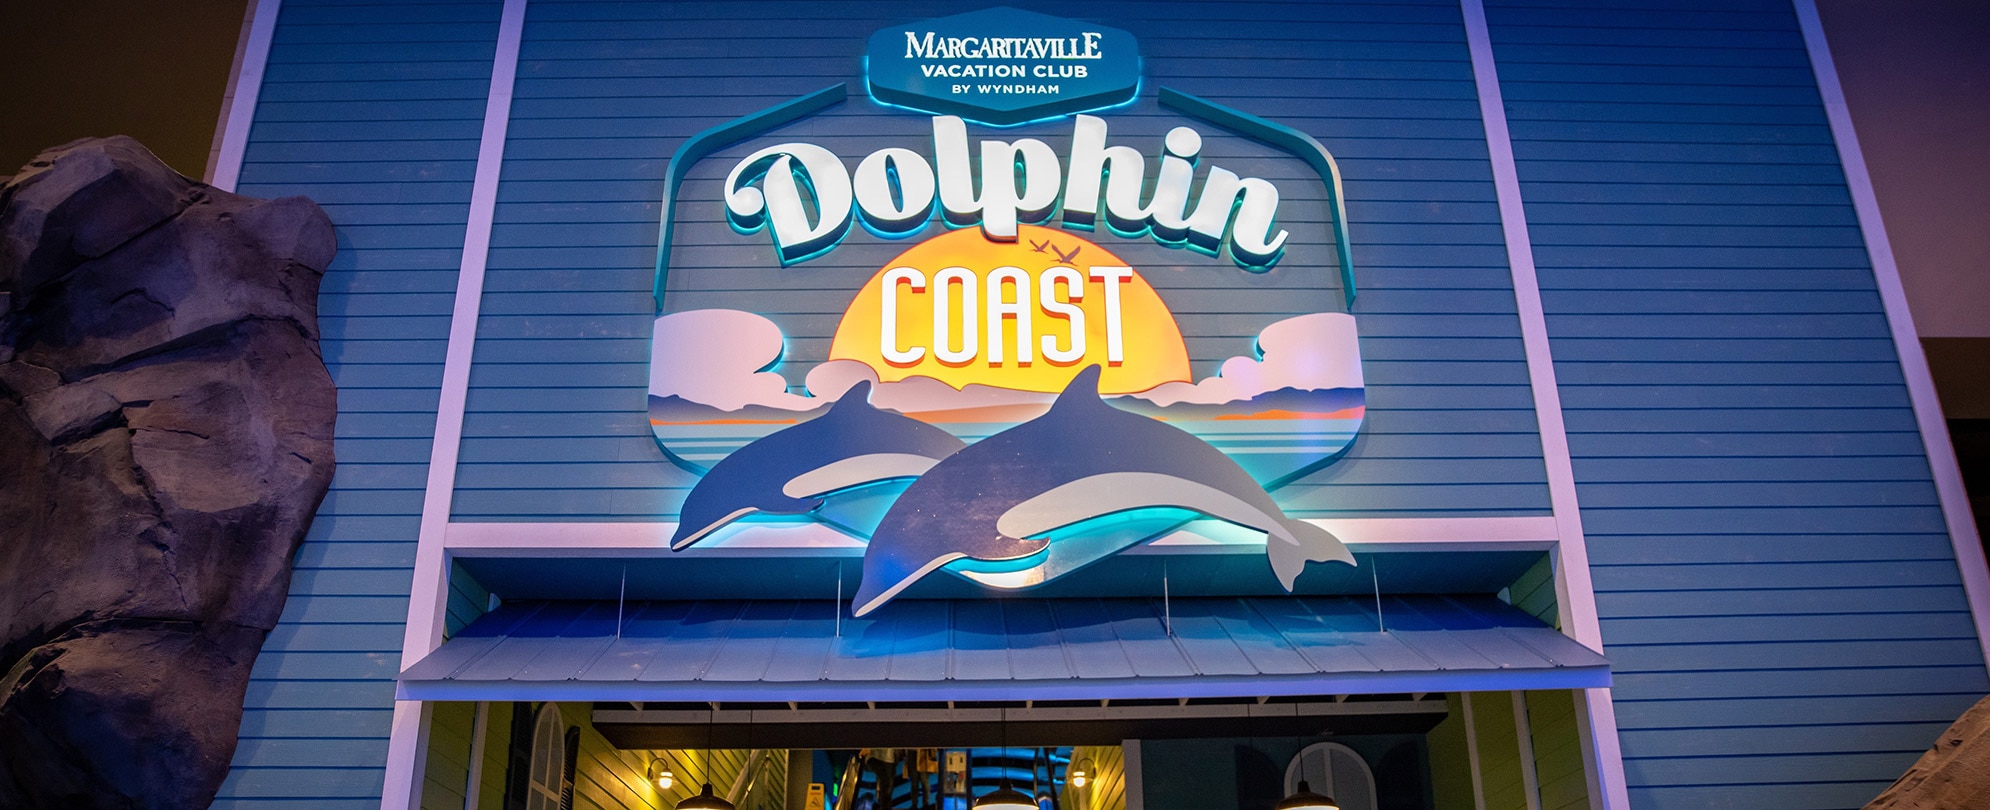 View of a large Dolphin Coast sign with a sun setting into ocean waves and two animated dolphins below the Margaritaville Vacation Club by Wyndham logo in the new gallery of the Georgia Aquarium.